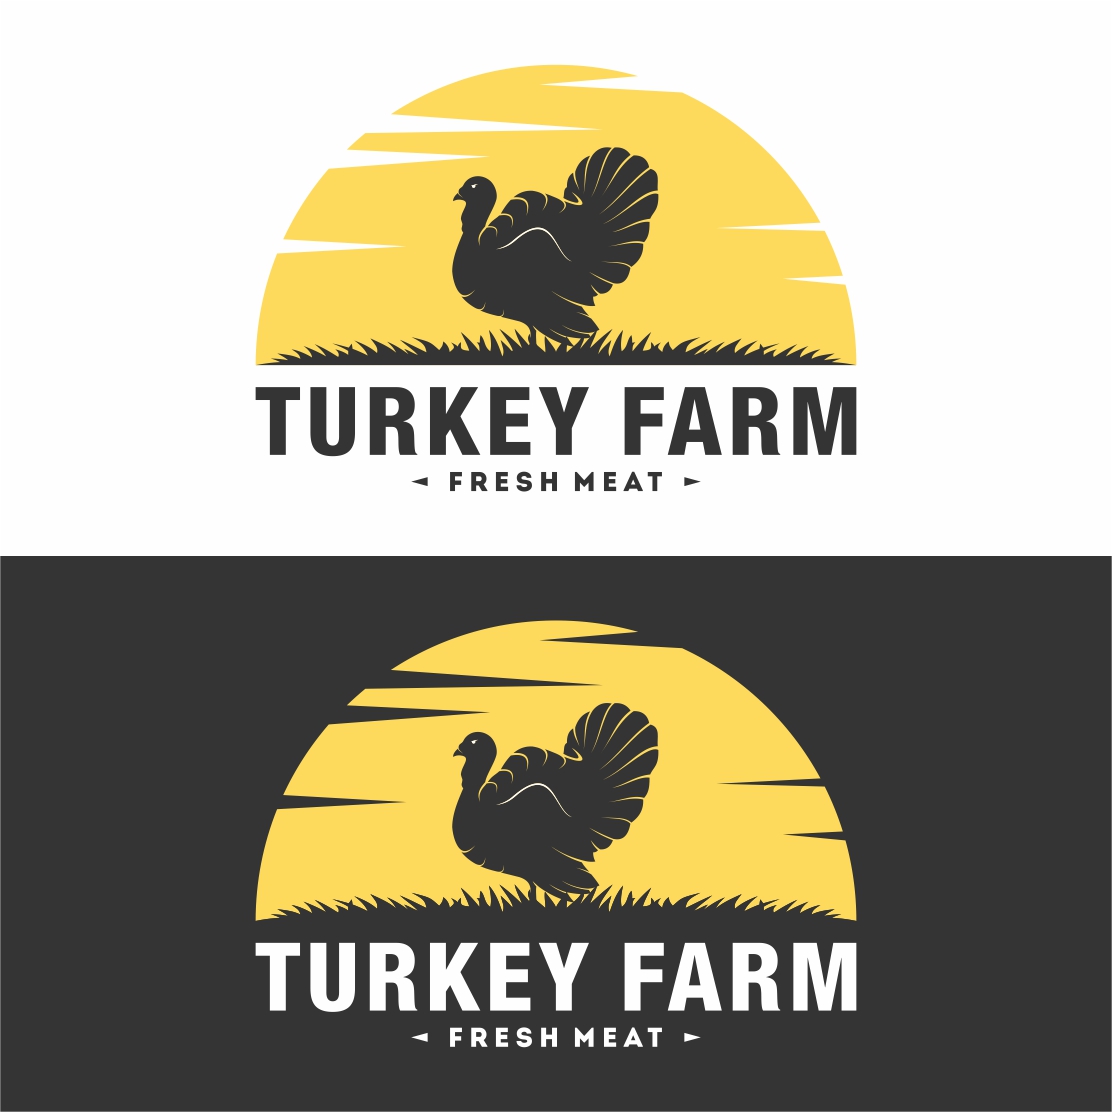 Turkey Farm logo design collection - only 10$ preview image.